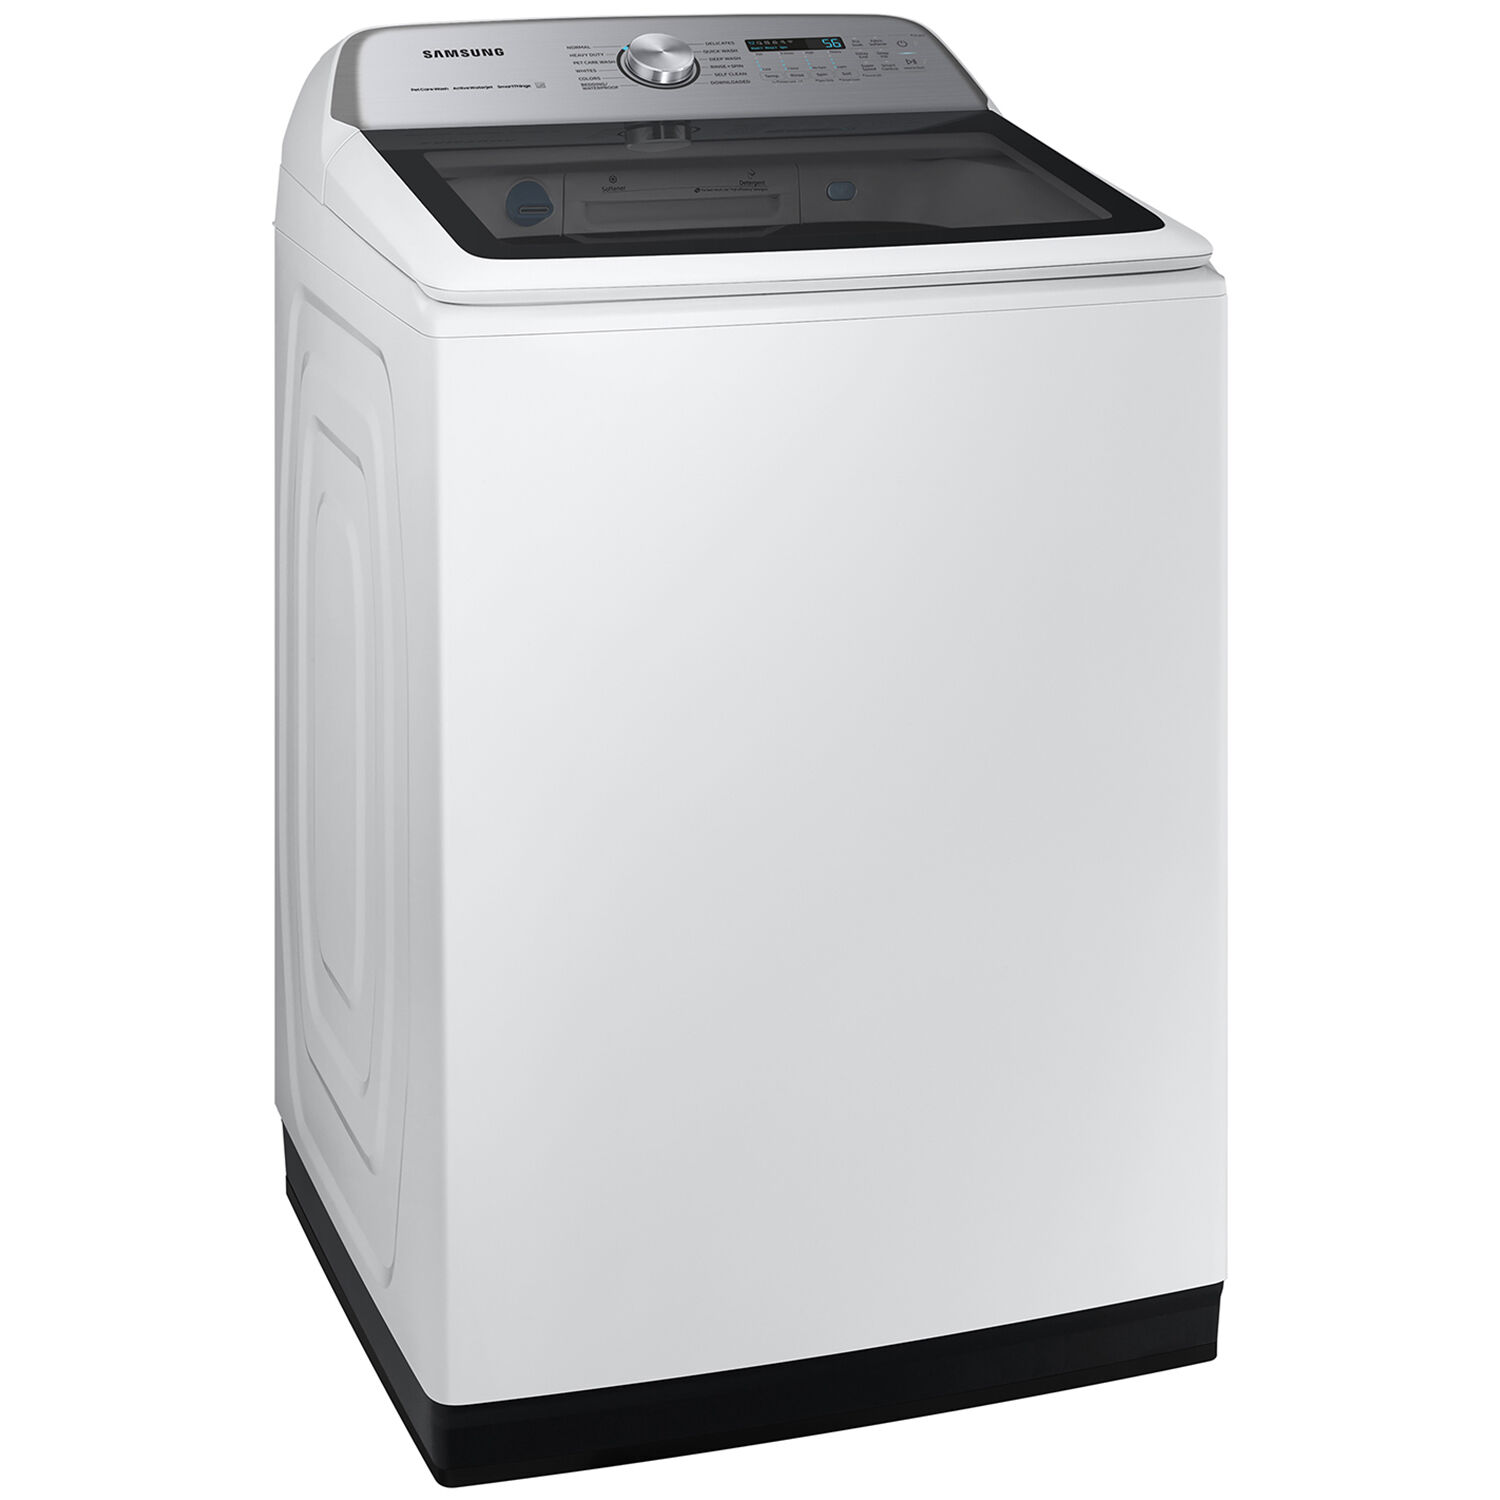 Samsung 27 in. 5.5 cu. ft. Smart Top Load Washer with Super Speed Wash -  White